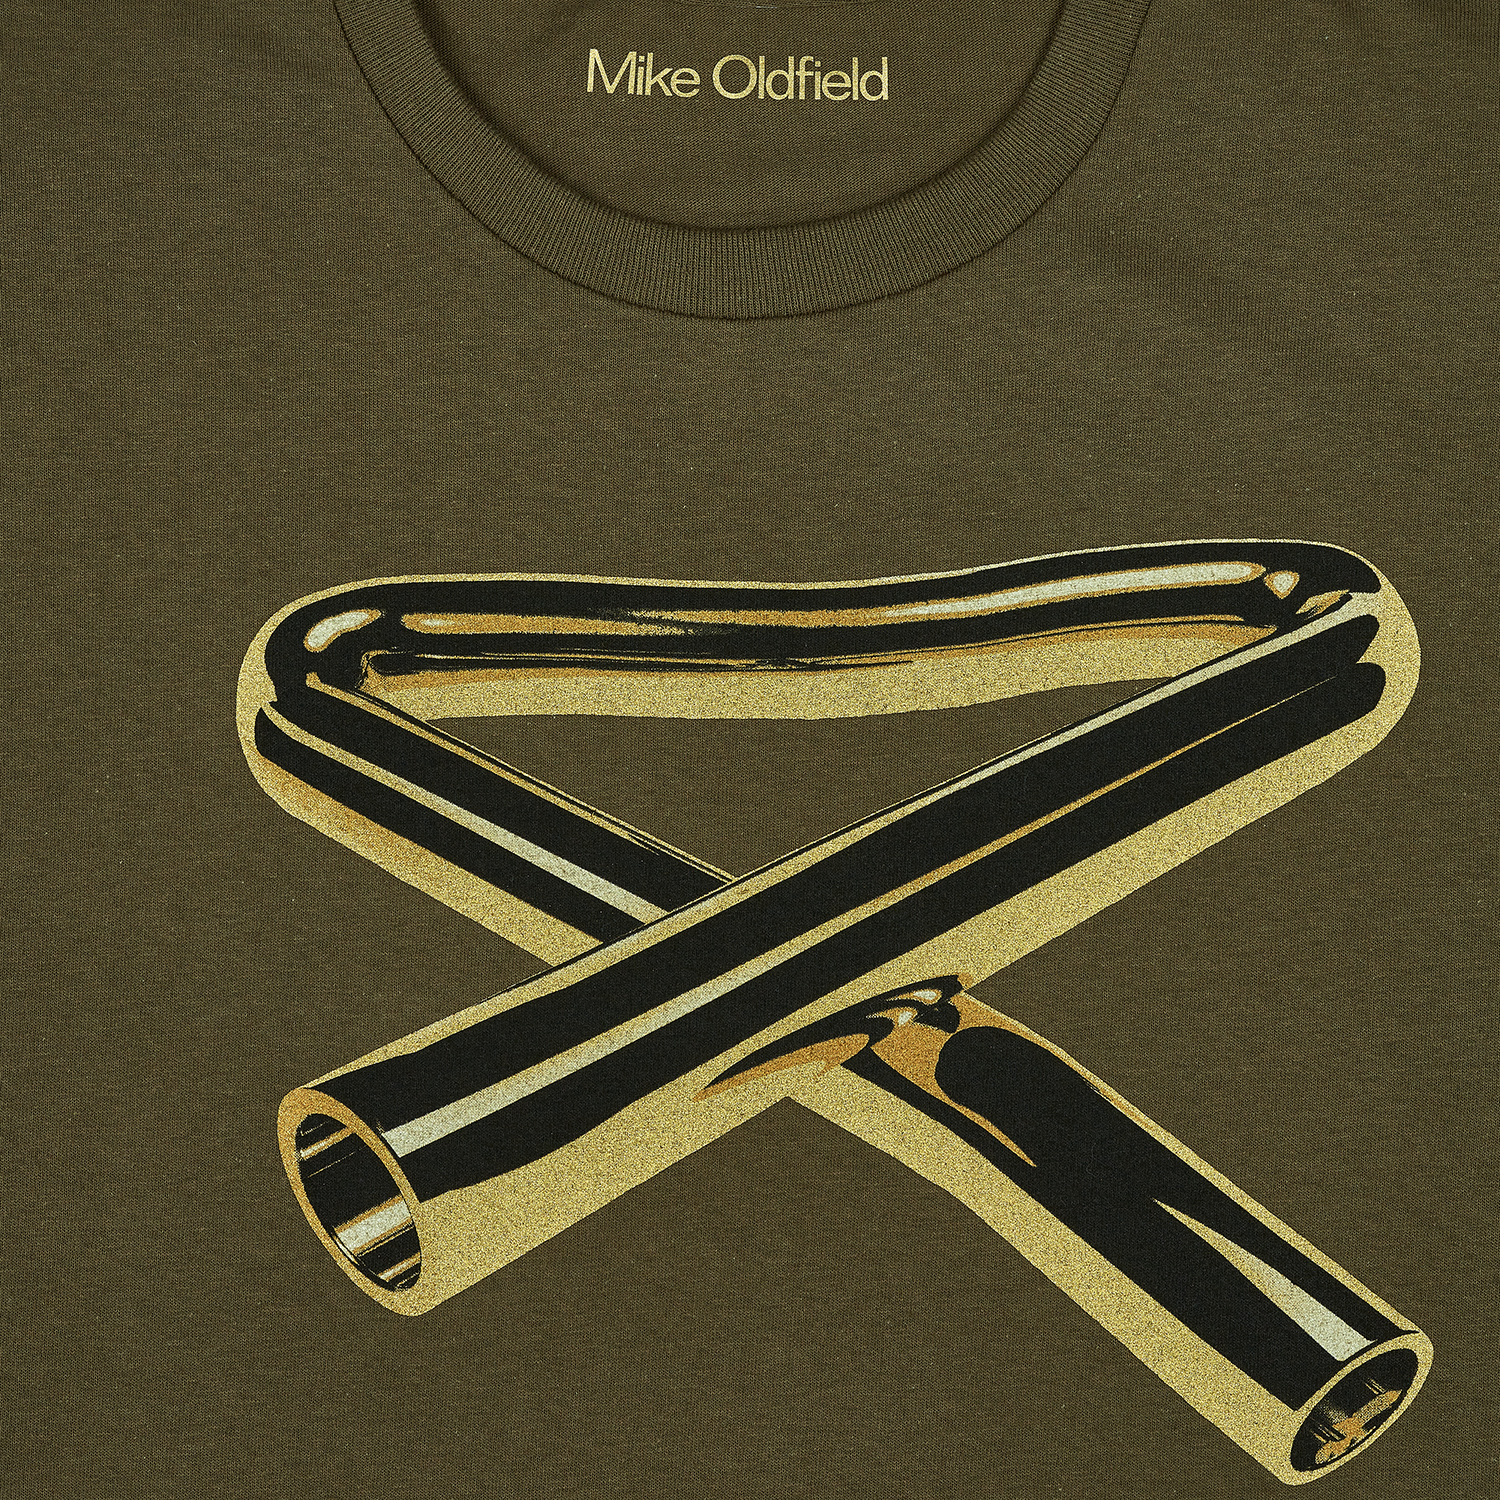 Mike Oldfield - Official Tubular Bells Anniversary T-shirt (Olive)